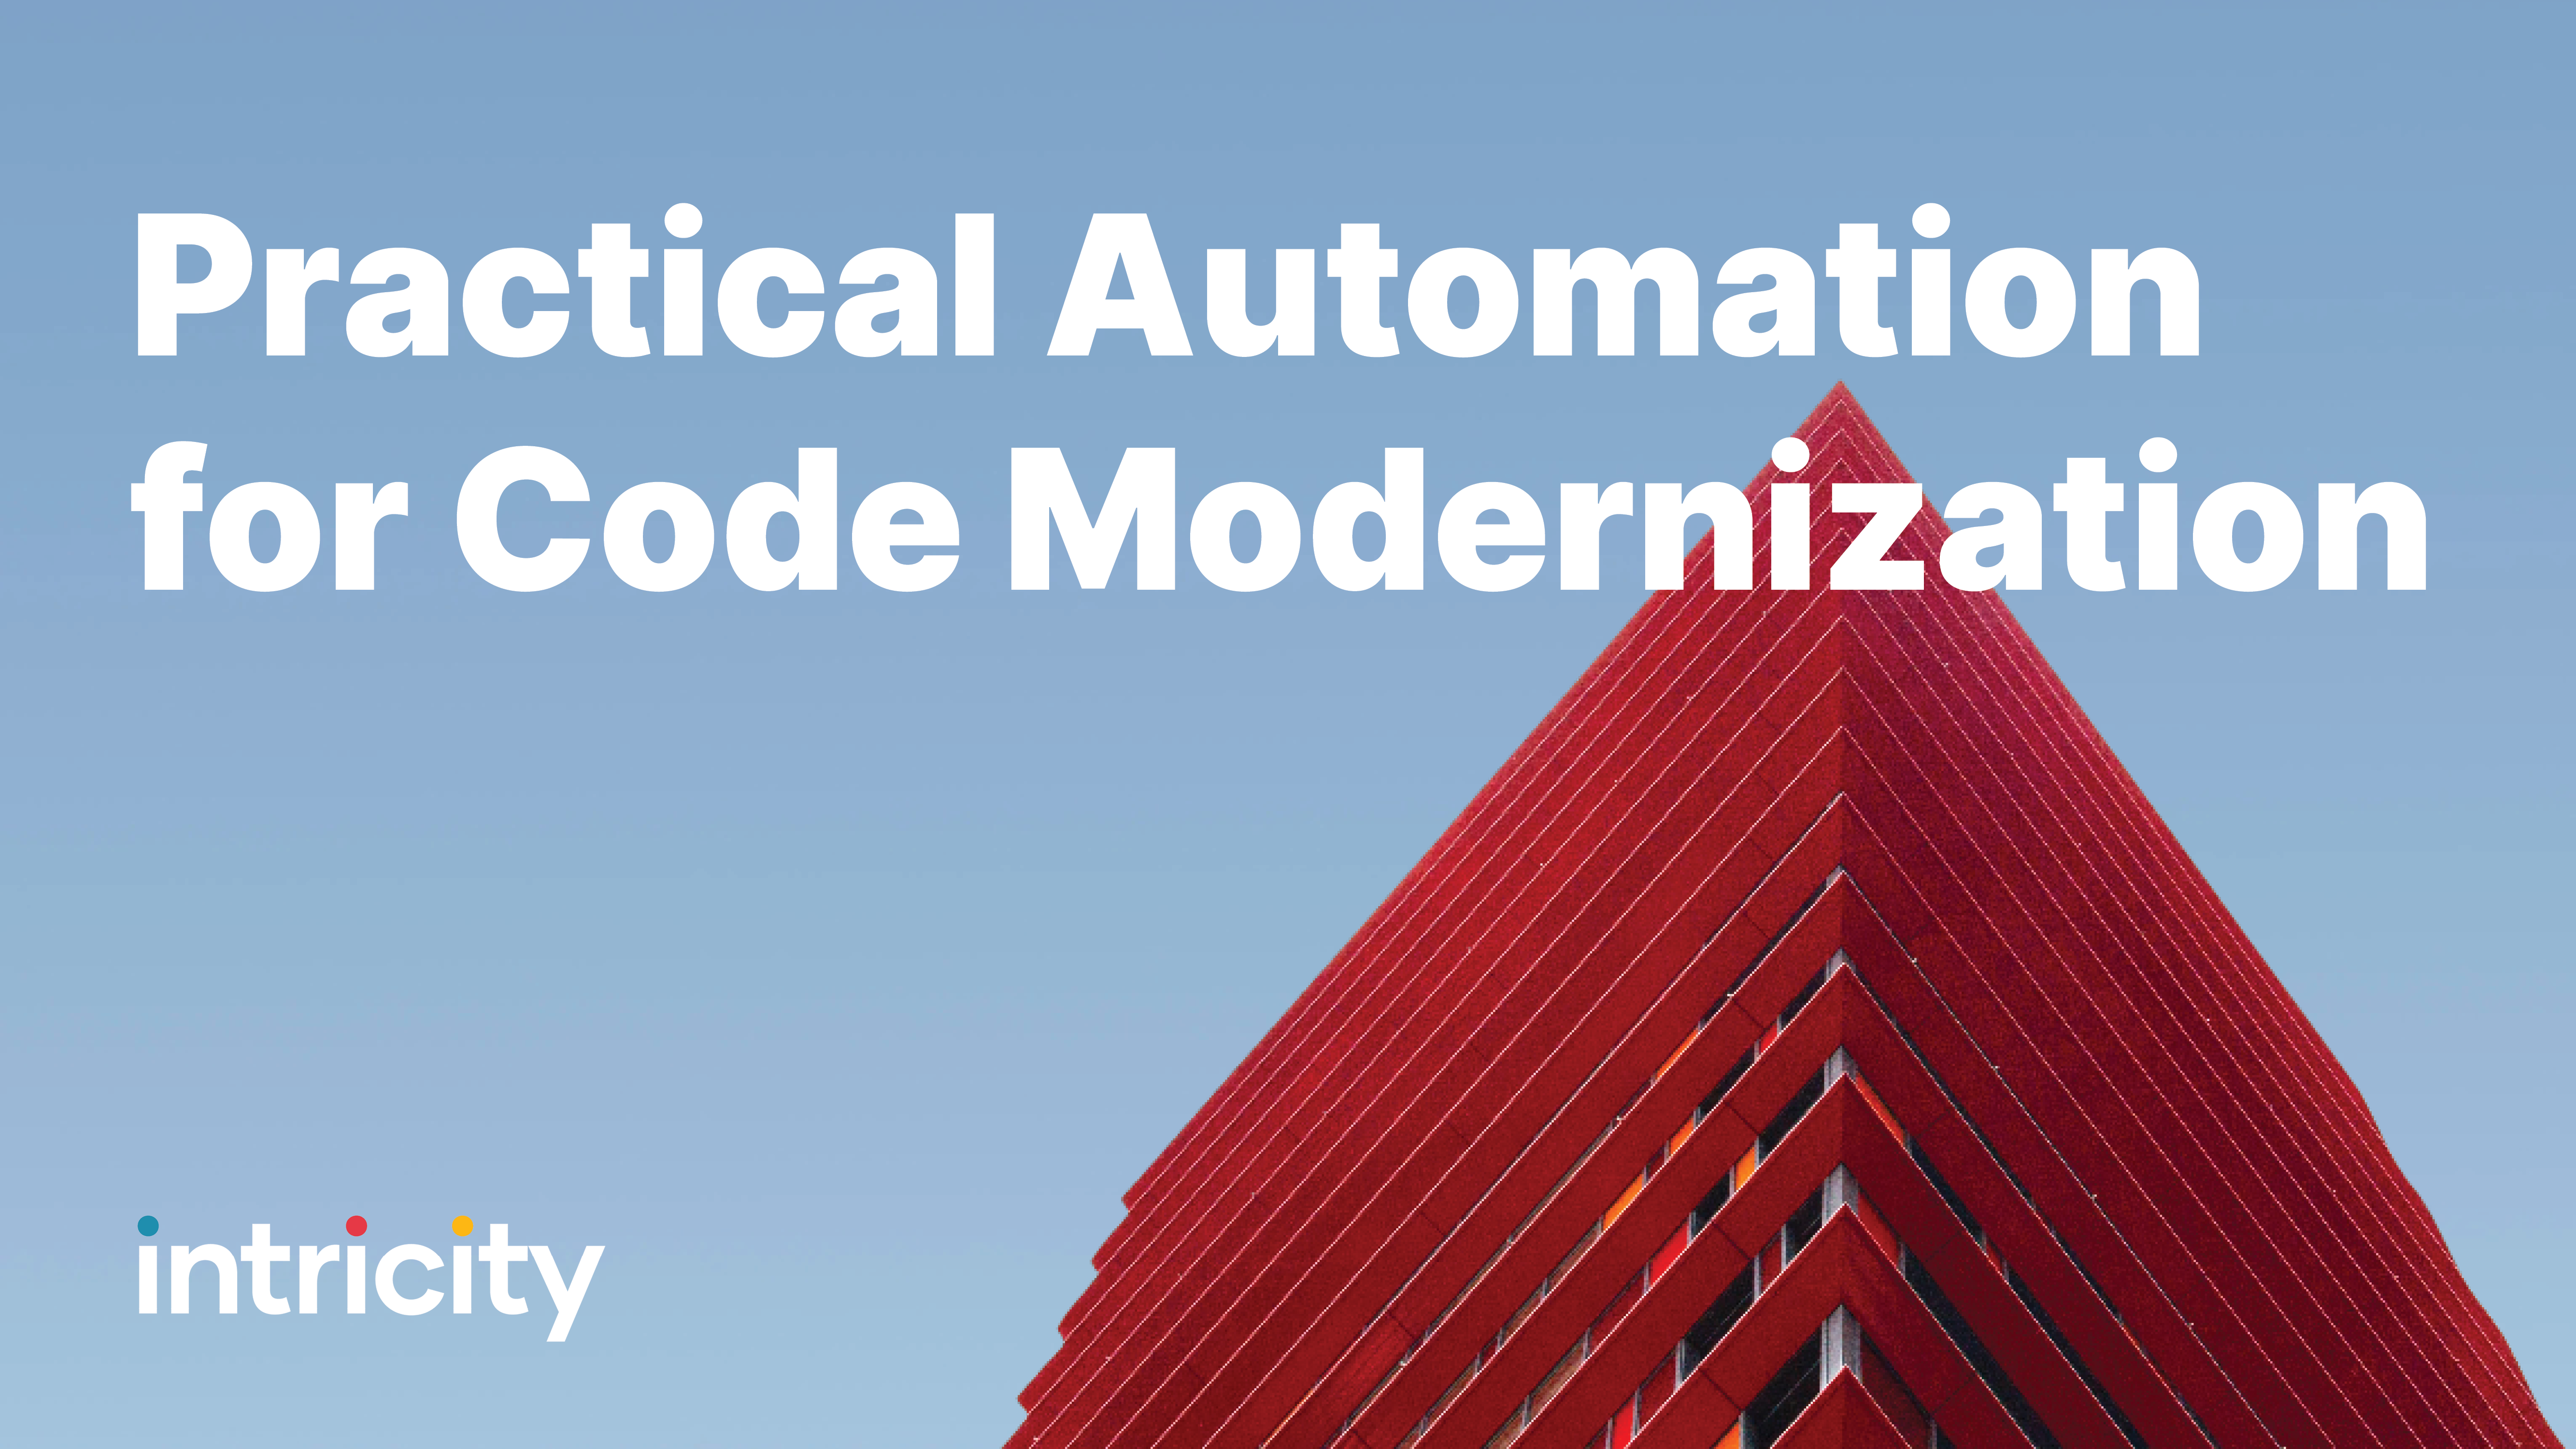 Practical Automation for Code Modernization